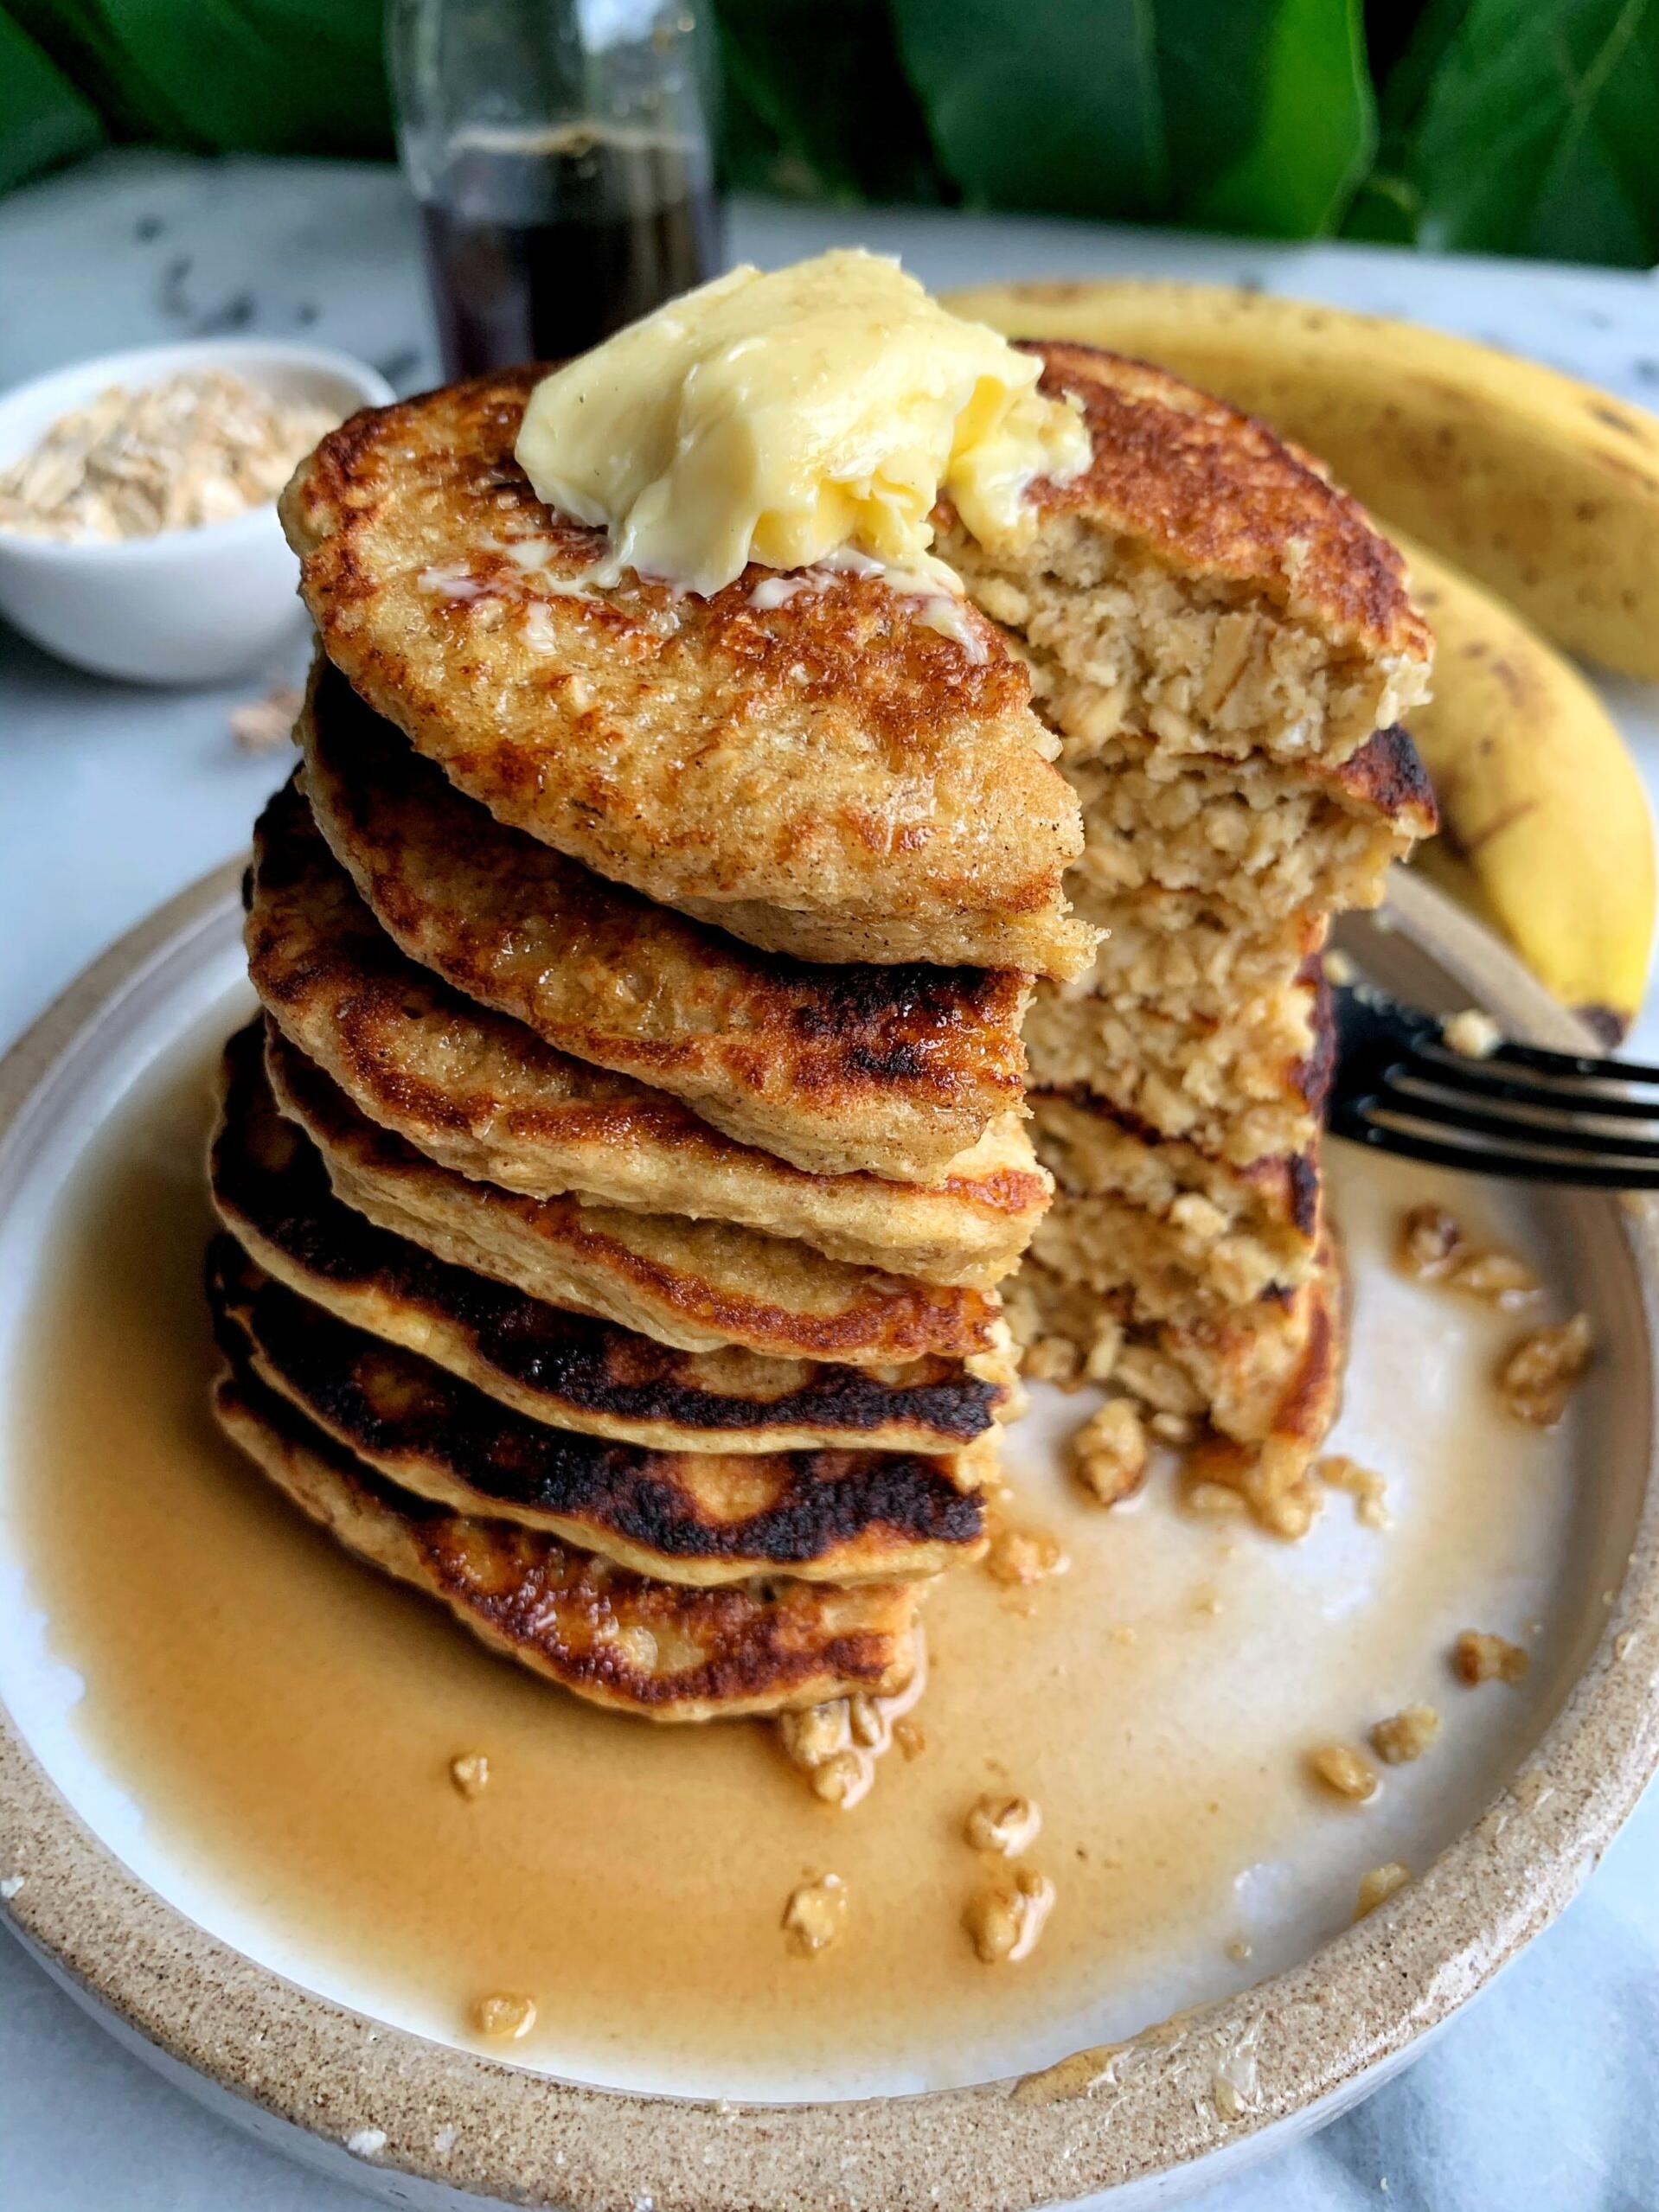  Who said healthy can't be tasty? These gluten-free pancakes are the perfect example!